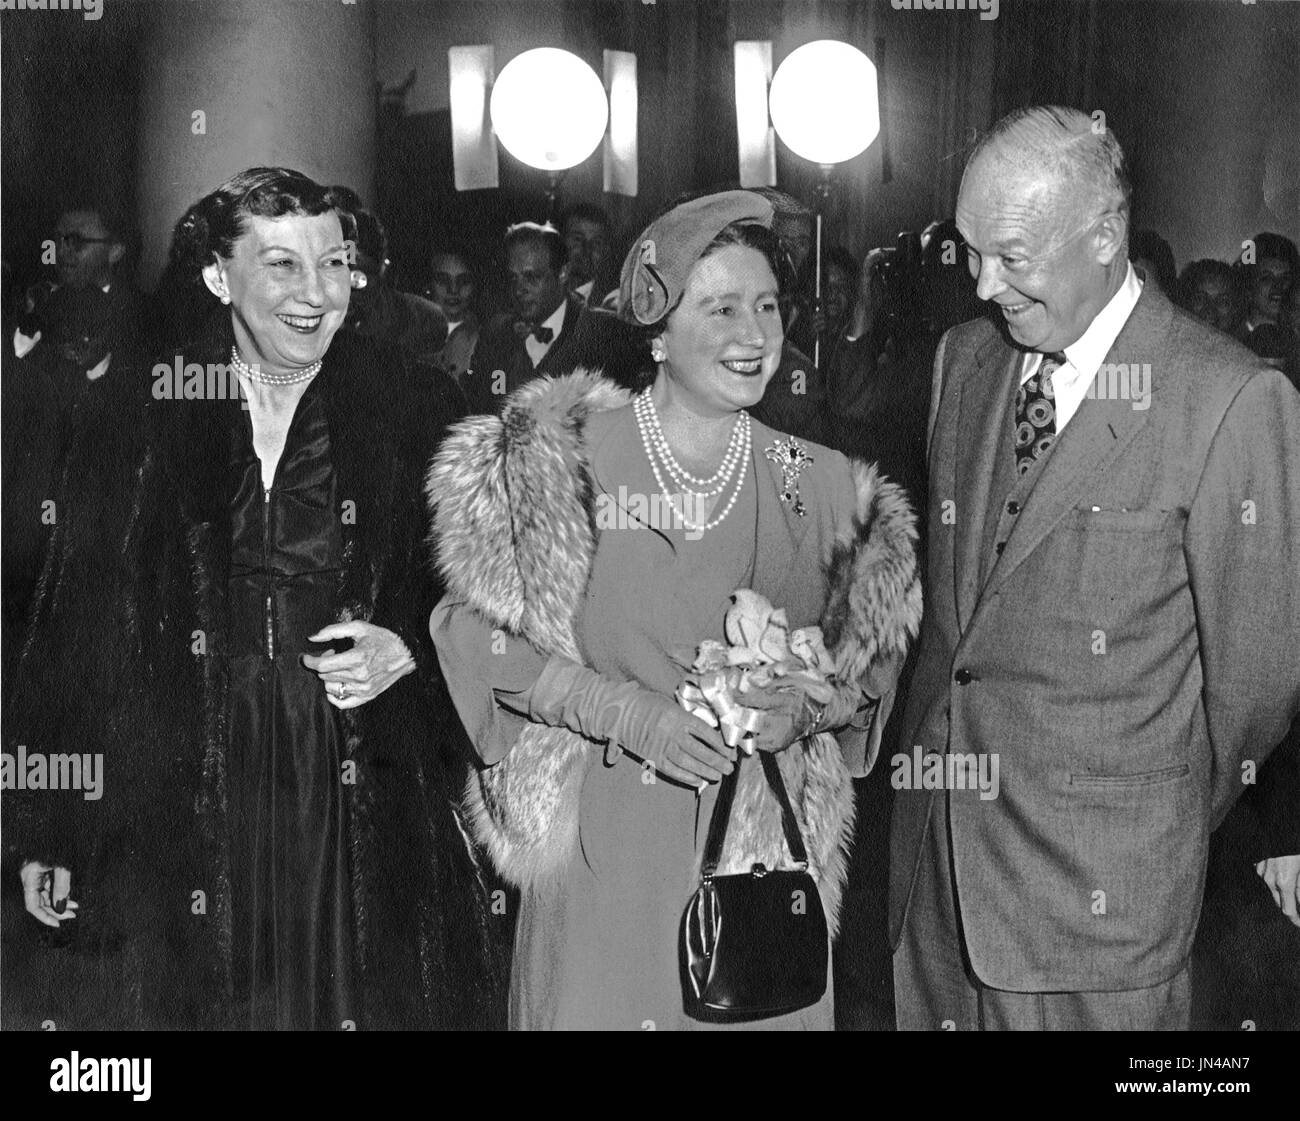 United States President Dwight D. Eisenhower, right, and first lady Mamie Eisenhower, left, welcome H.M. Queen Elizabeth, The Queen Mother of Great Britain, center, to the White House in Washington, DC for a dinner in her honor on November 4, 1954. Mandatory Credit: Abbie Rowe / National Park Service via CNP Stock Photo